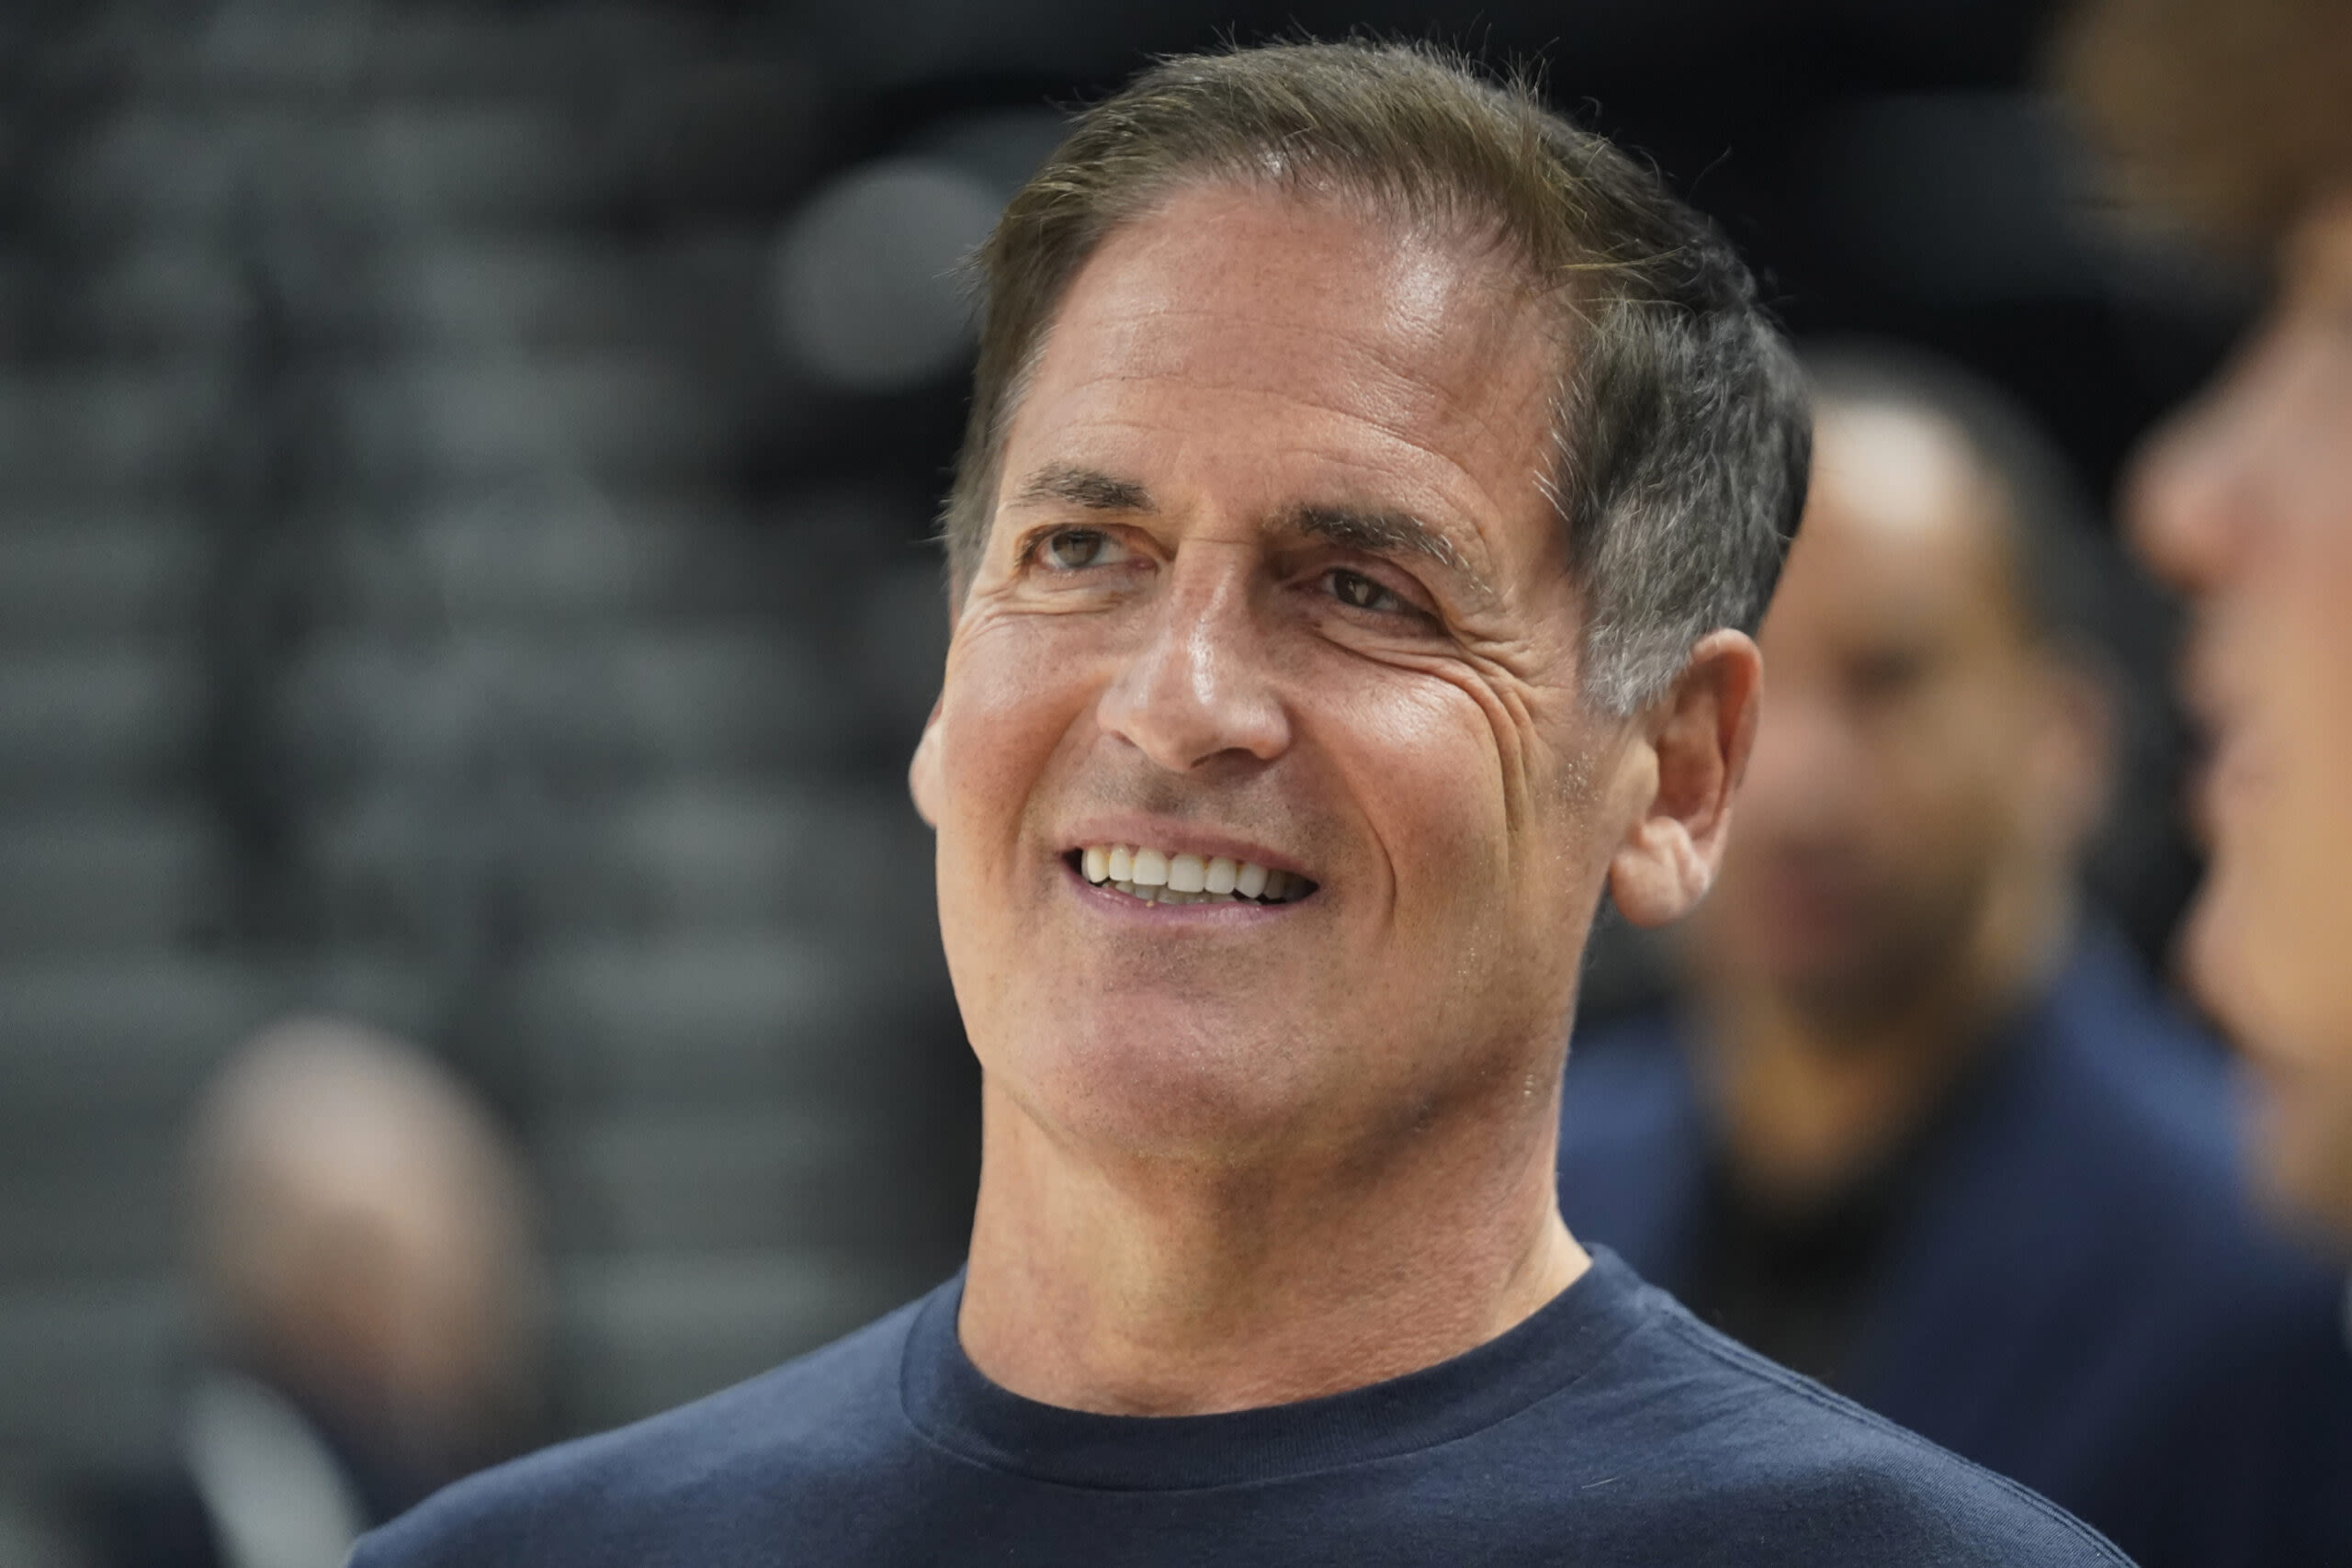 Mark Cuban Goes to Bat For the Biden Economy, Argues Trump ‘Diminished’ Wage Growth